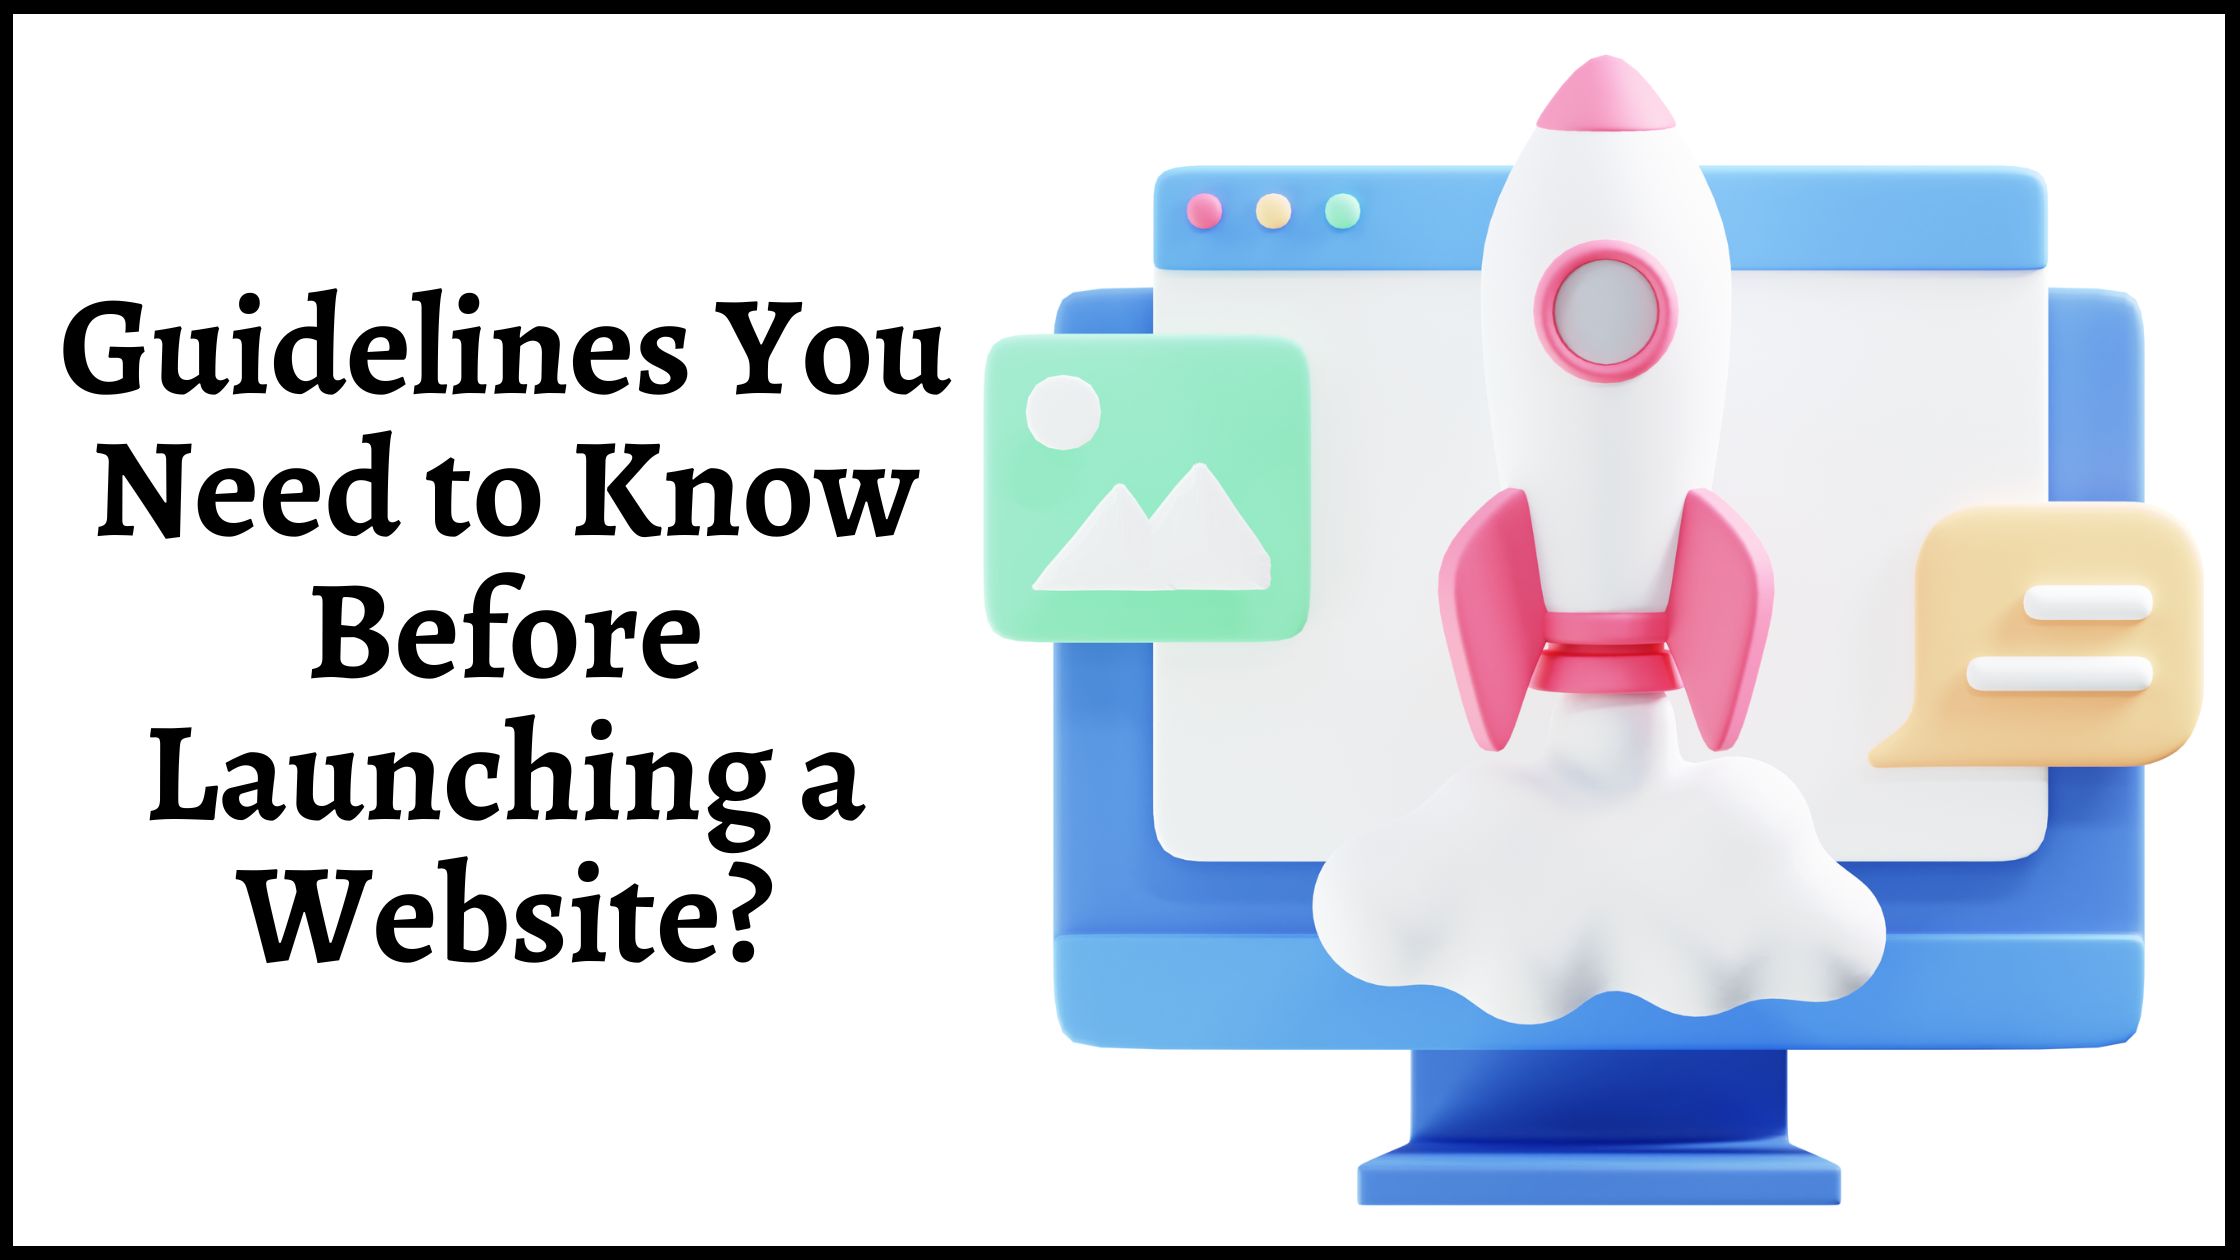 Checklist to Follow When Launching a New Website